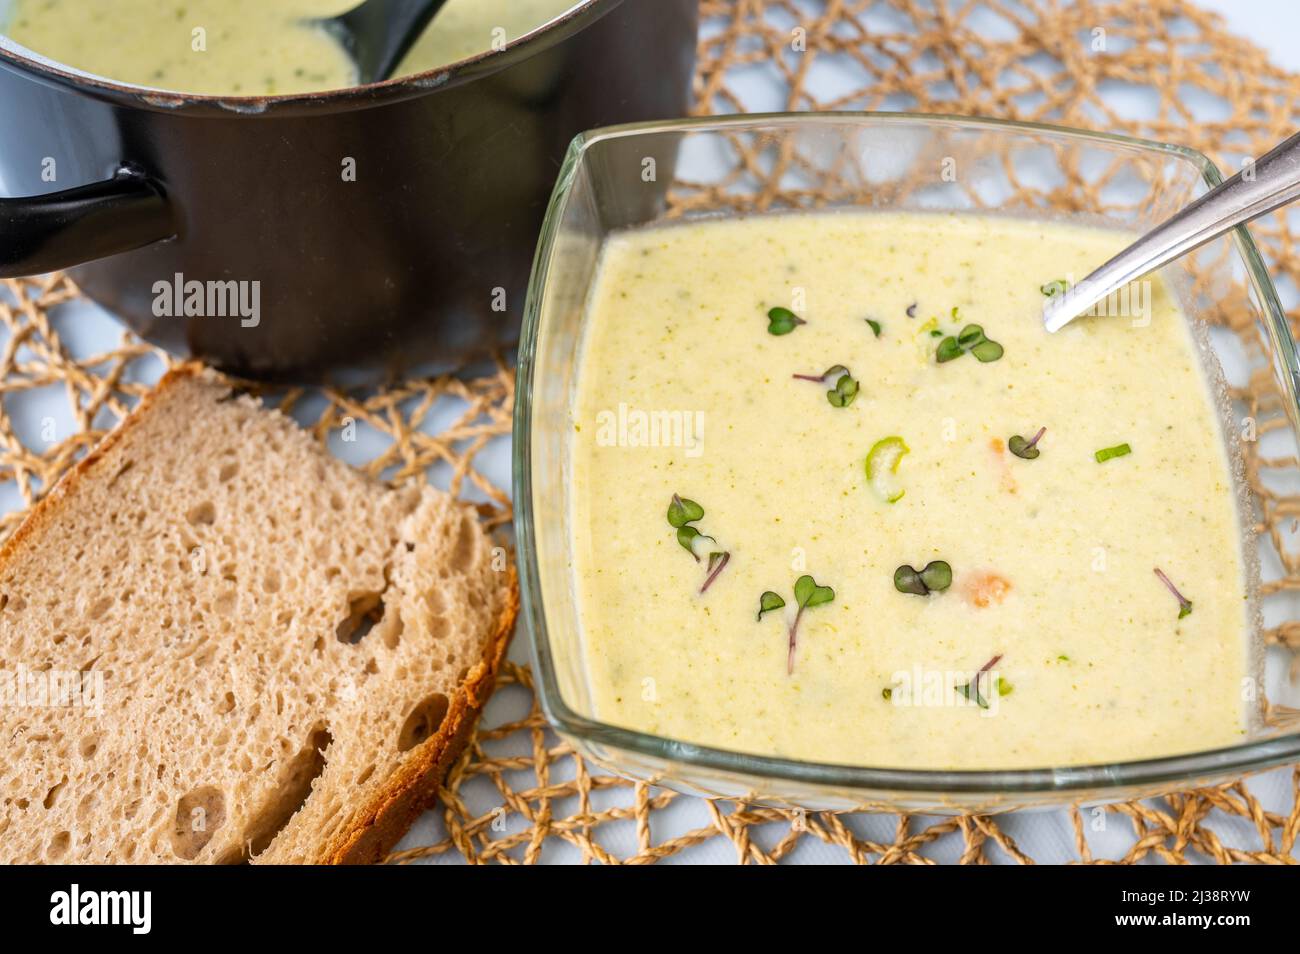 Creamy broccoli soup in glass bowl and in black pot, bread on table. Stock Photo